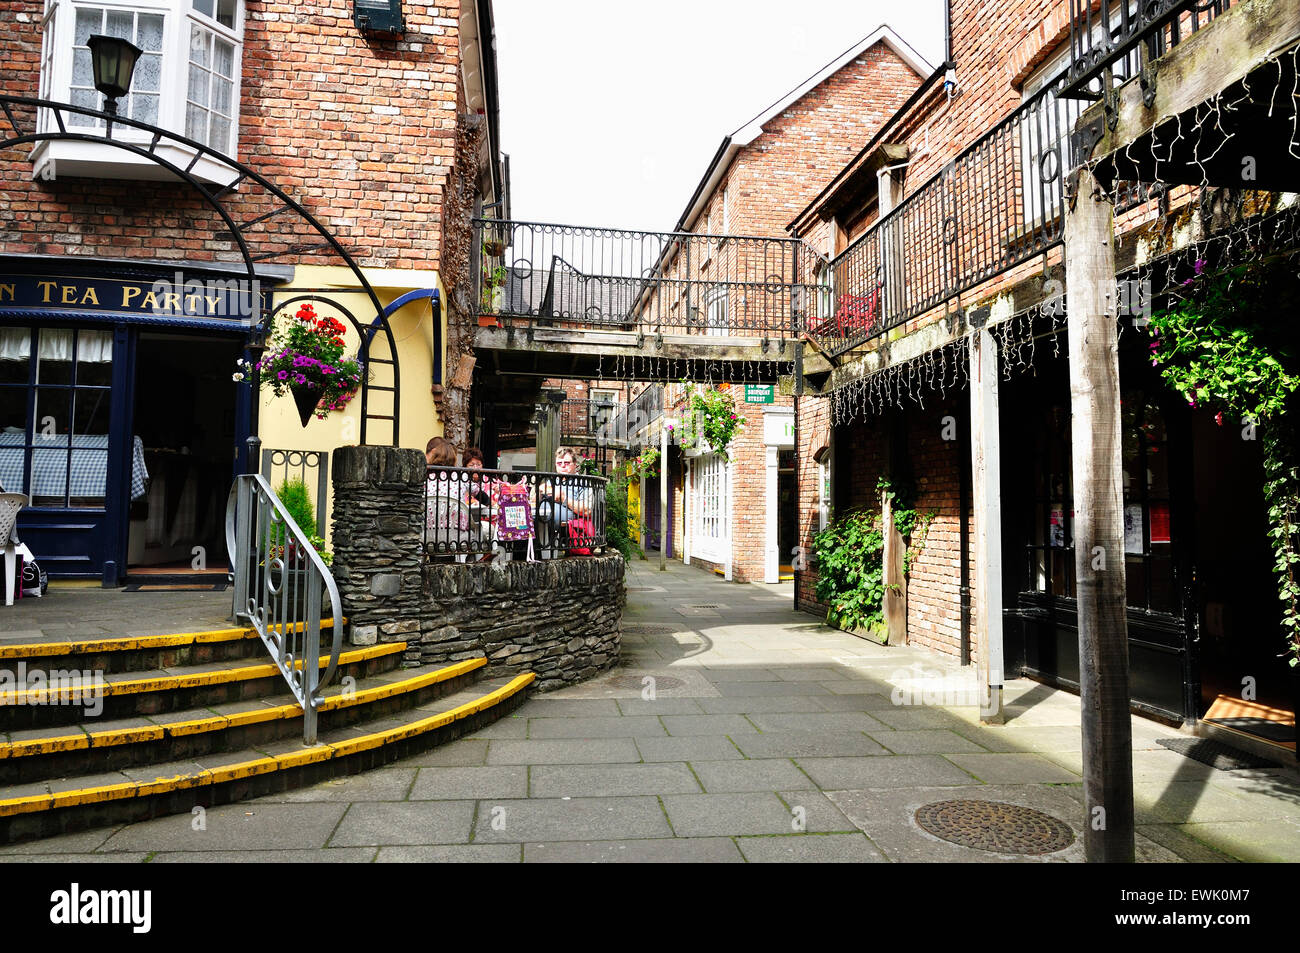 The Craft Village. Derry, Londonderry. County Londonderry. Northern Ireland. United Kingdom. UK Stock Photo